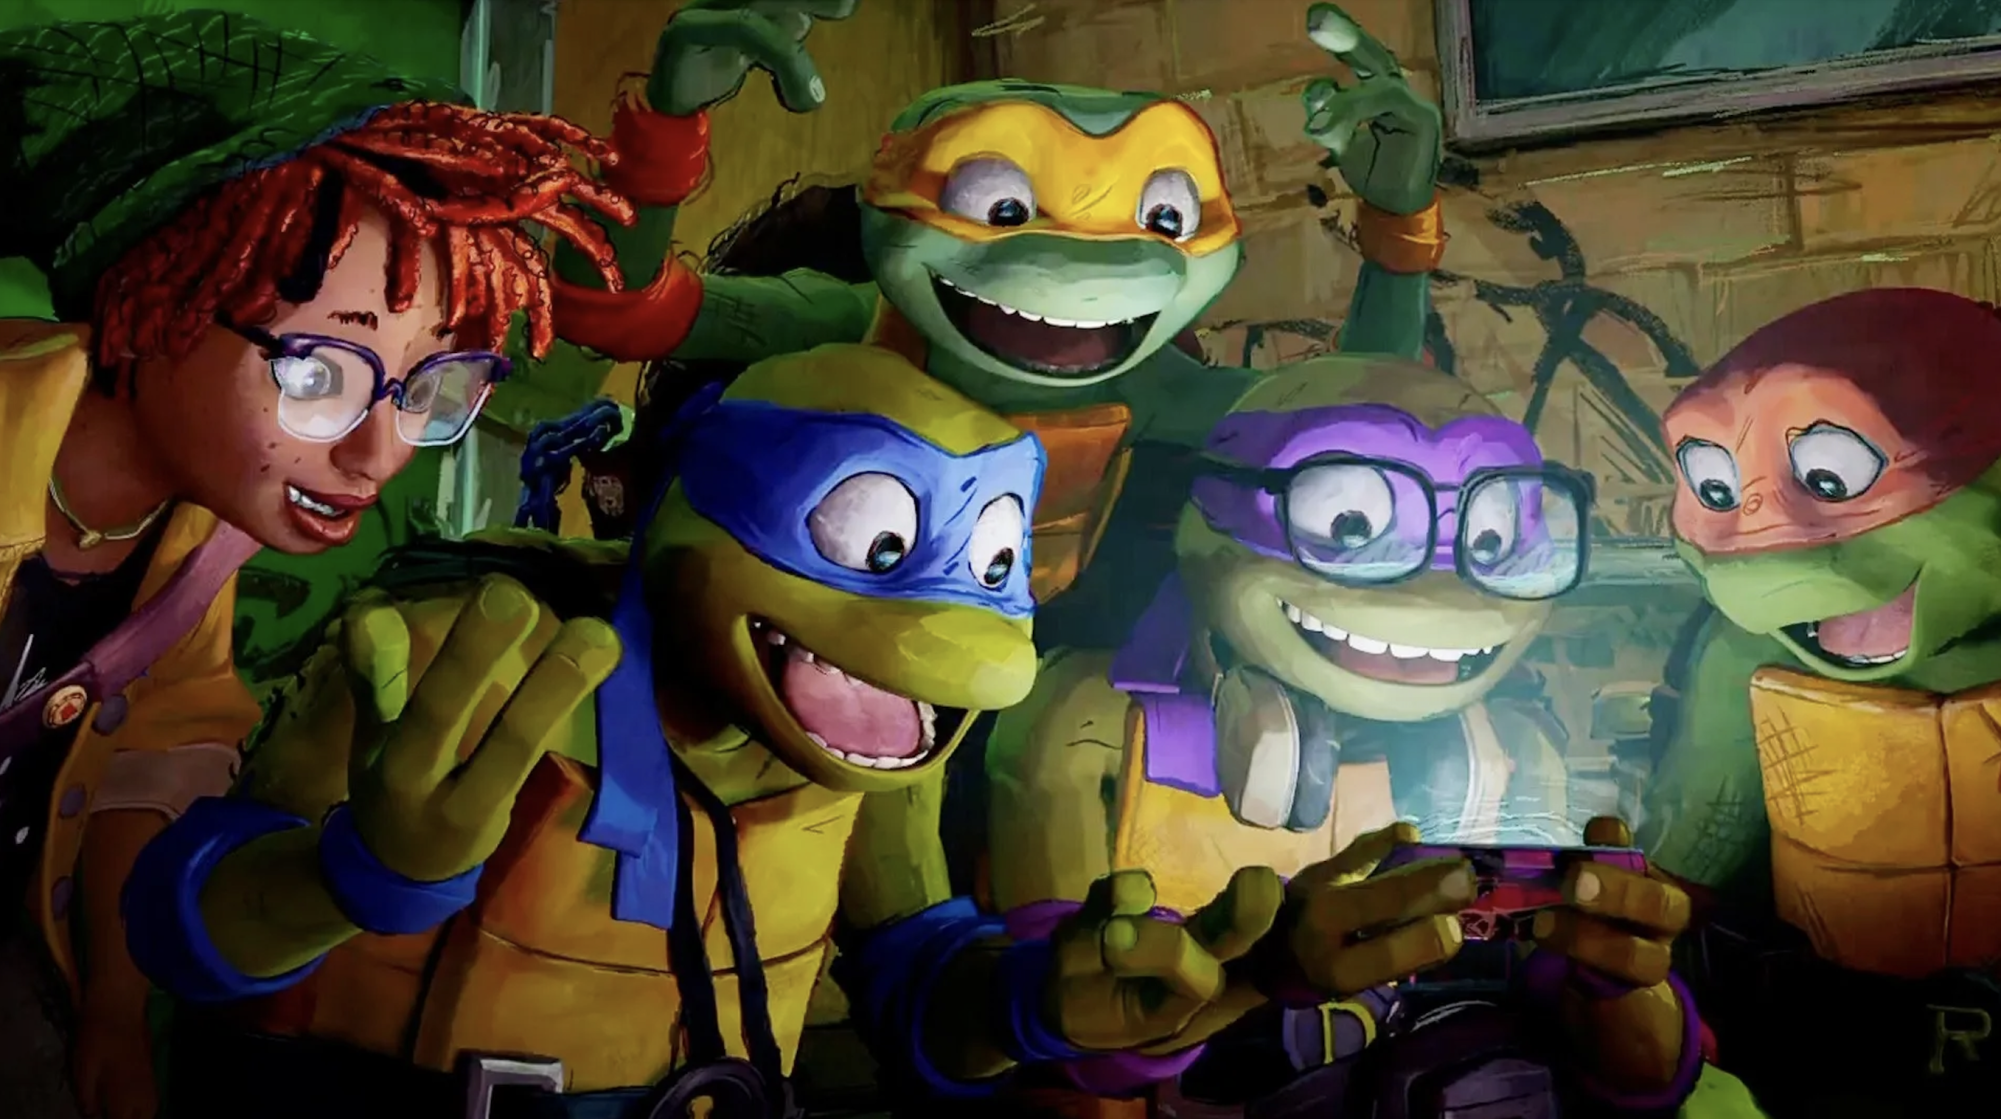 Screen-clip from the new movie, Teenage Mutant Ninja Turtles: Mutant Mayhem.
             Courtesy of Paramount Pictures